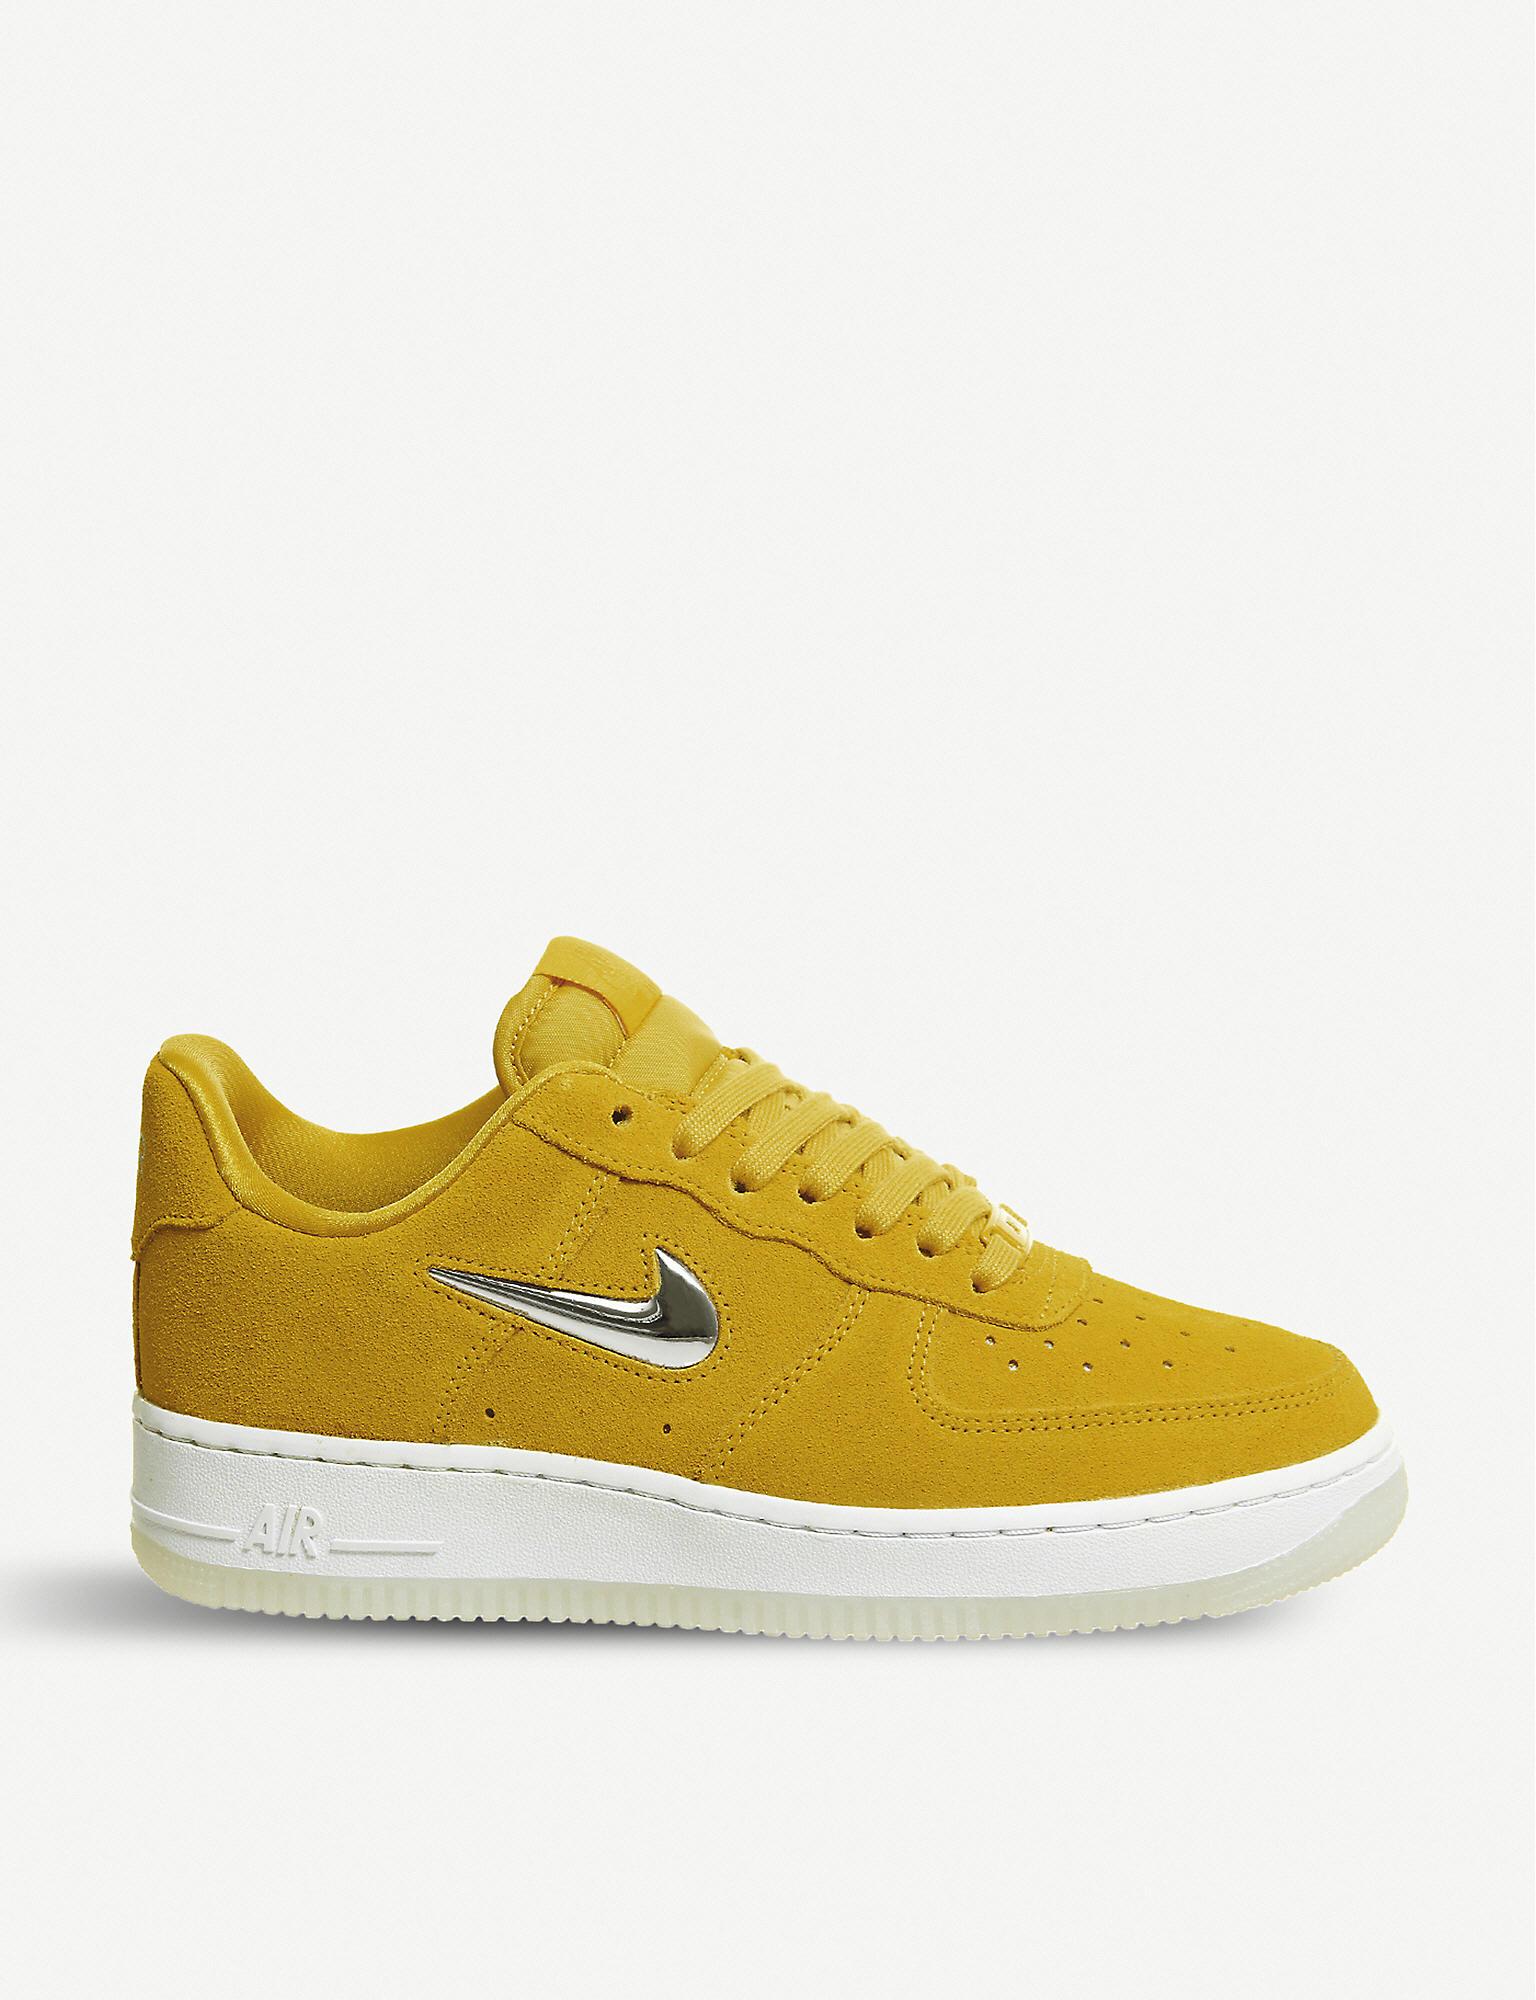 Nike Air Force 1 Jewel Suede Trainers in Yellow for Men - Lyst1536 x 2000